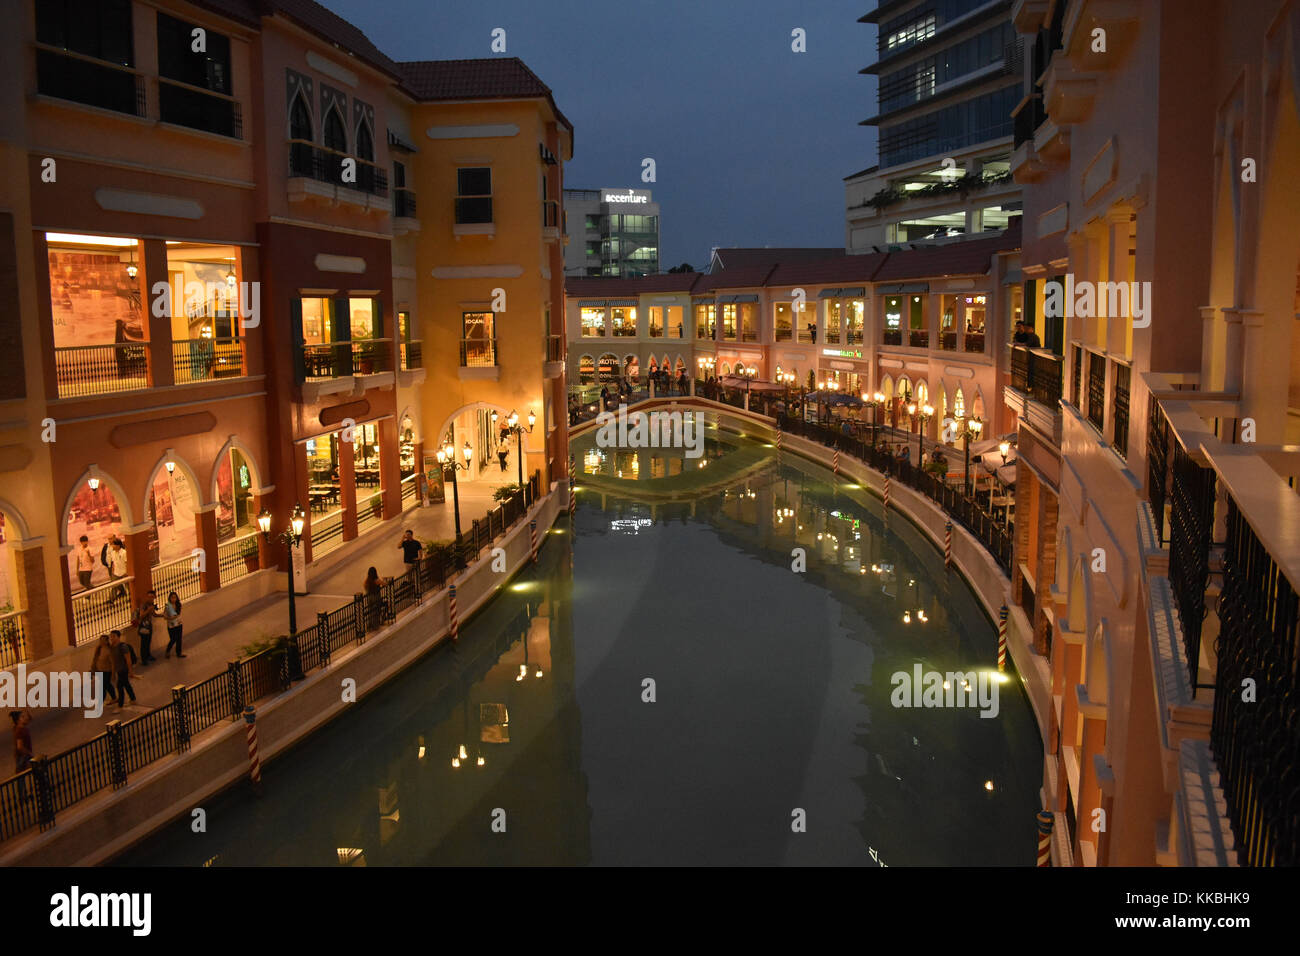 The Grand Venice Canal Mall in Taguig, Metro Manila, Philippines. This replica is a sight to see in the busy metro. Stock Photo